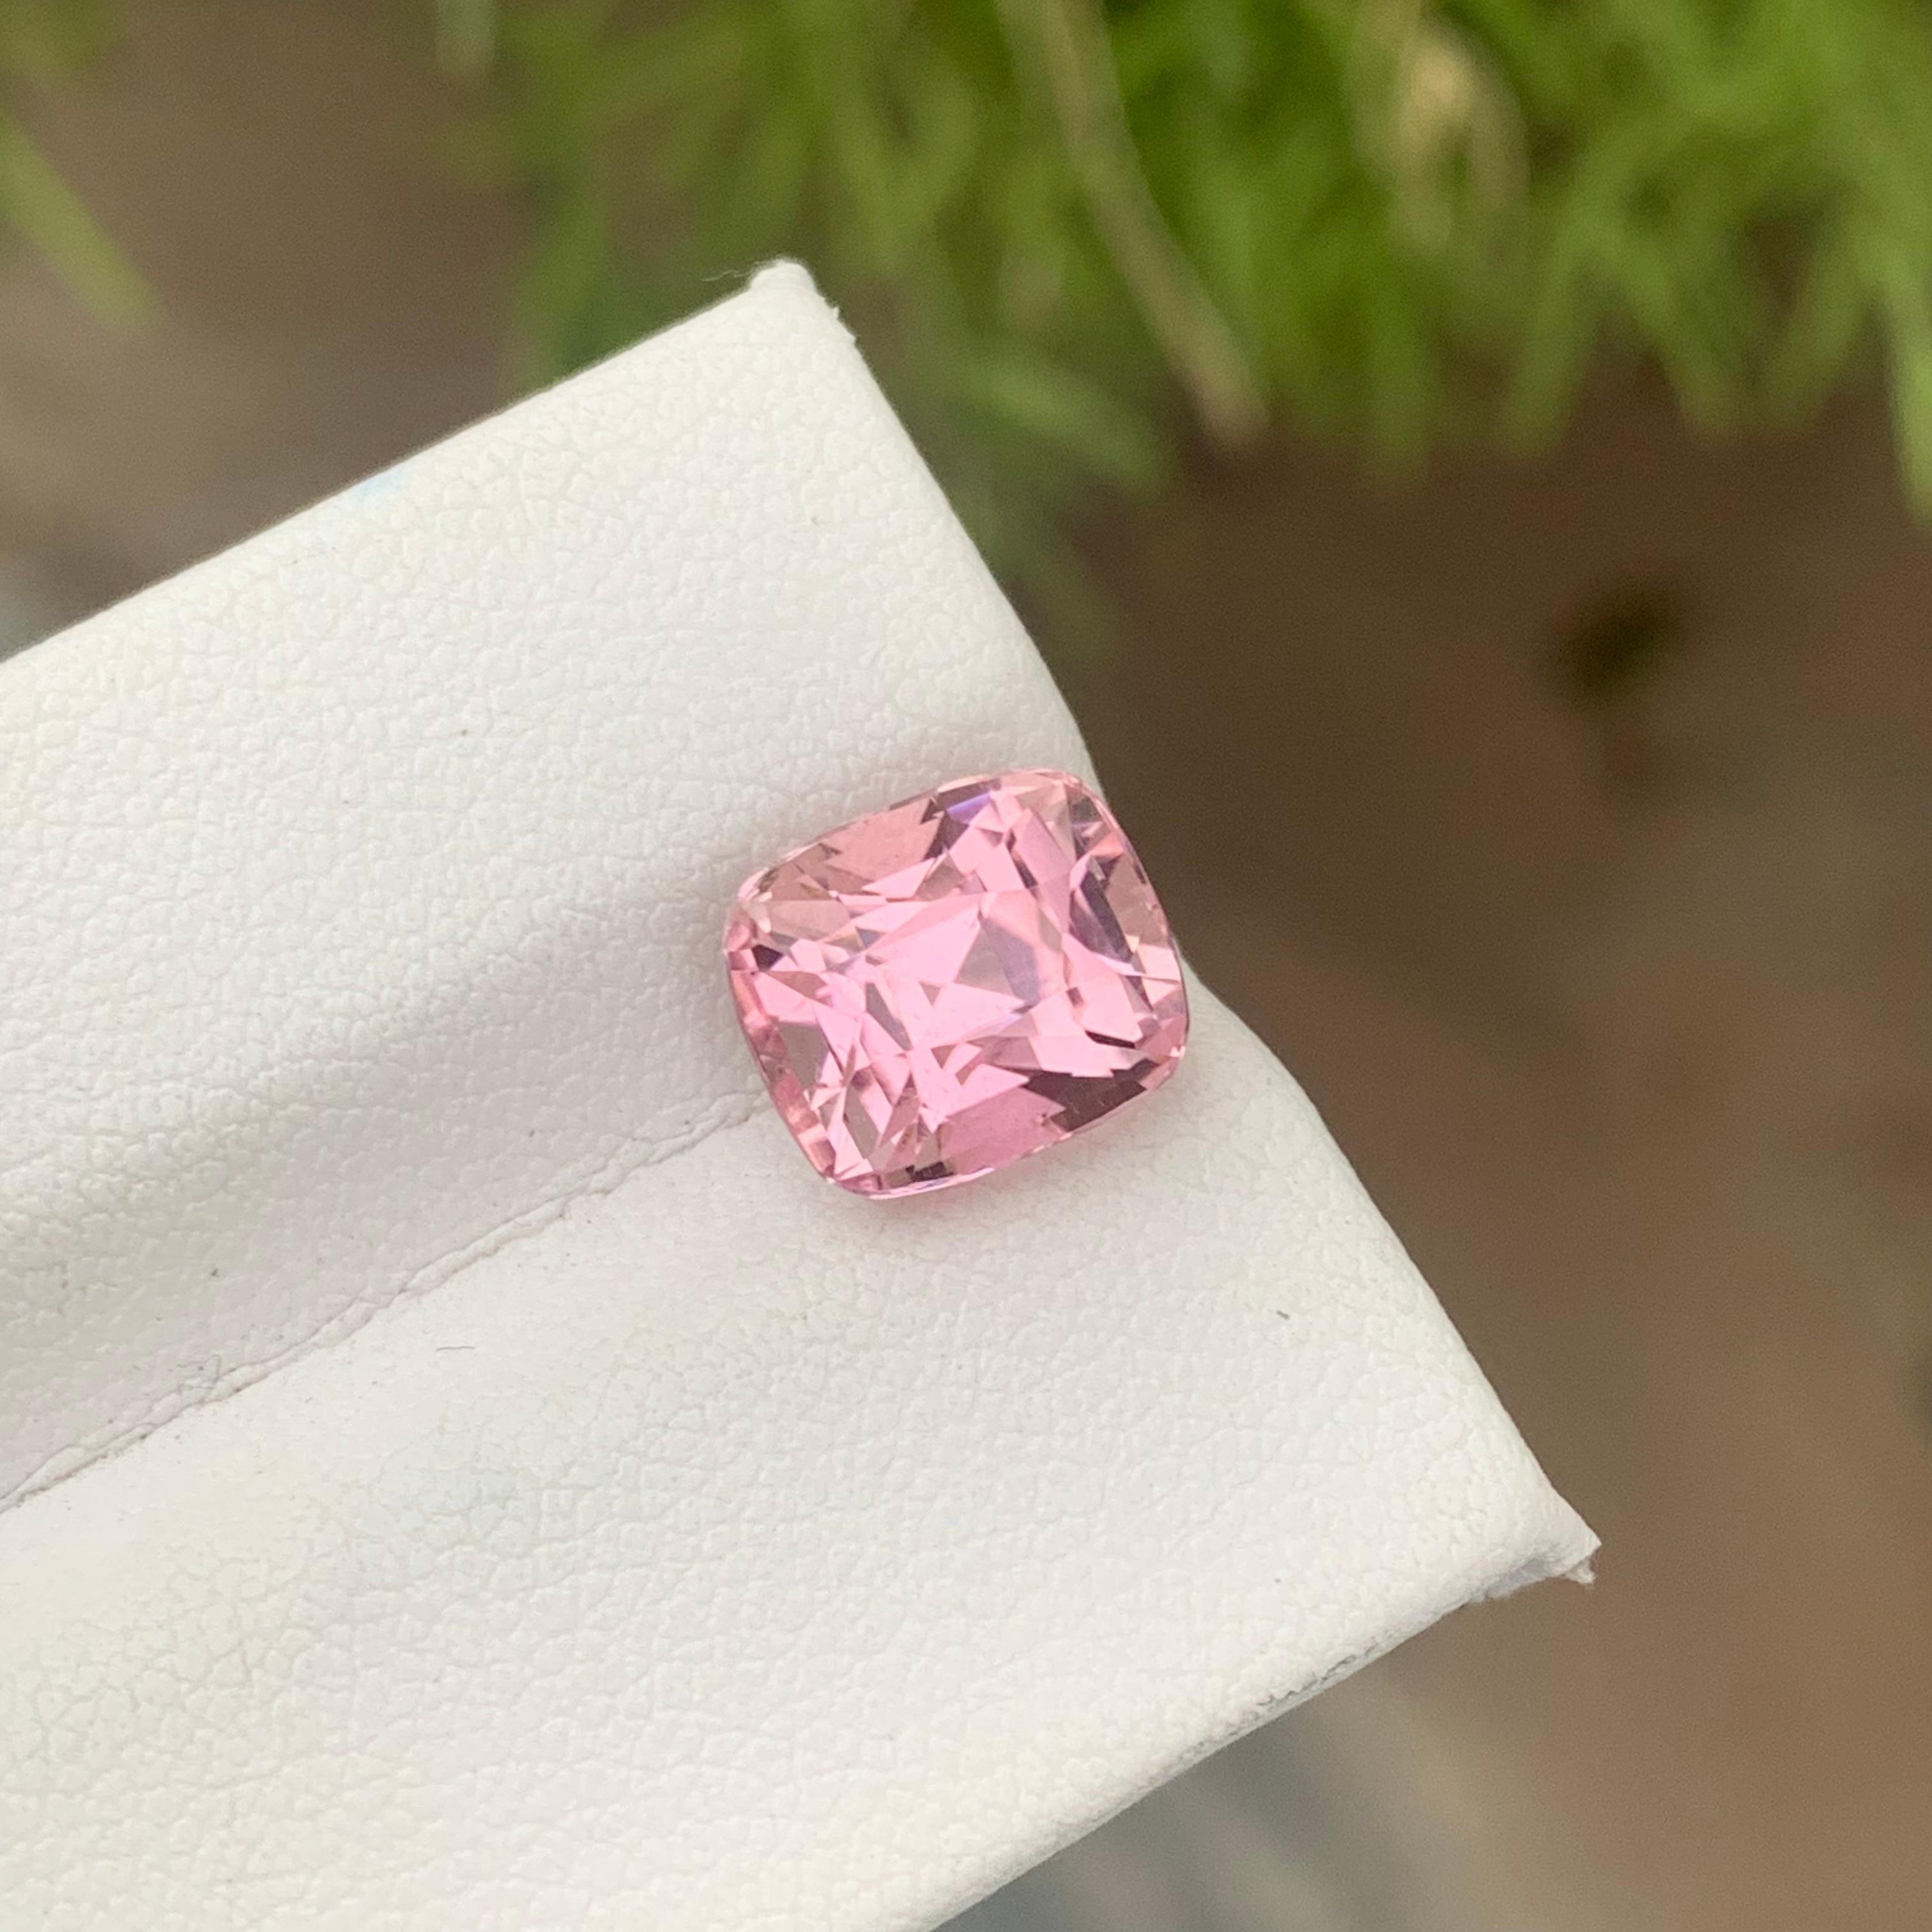 Faceted Tourmaline
Weight: 4.25 Carats
Dimension: 9.3x8x8 Mm
Origin: Kunar Afghanistan
Color: Pink
Shape: Mix Cushion
Clarity: Eye Clean
Certificate: On Demand

With a rating between 7 and 7.5 on the Mohs scale of mineral hardness, tourmaline